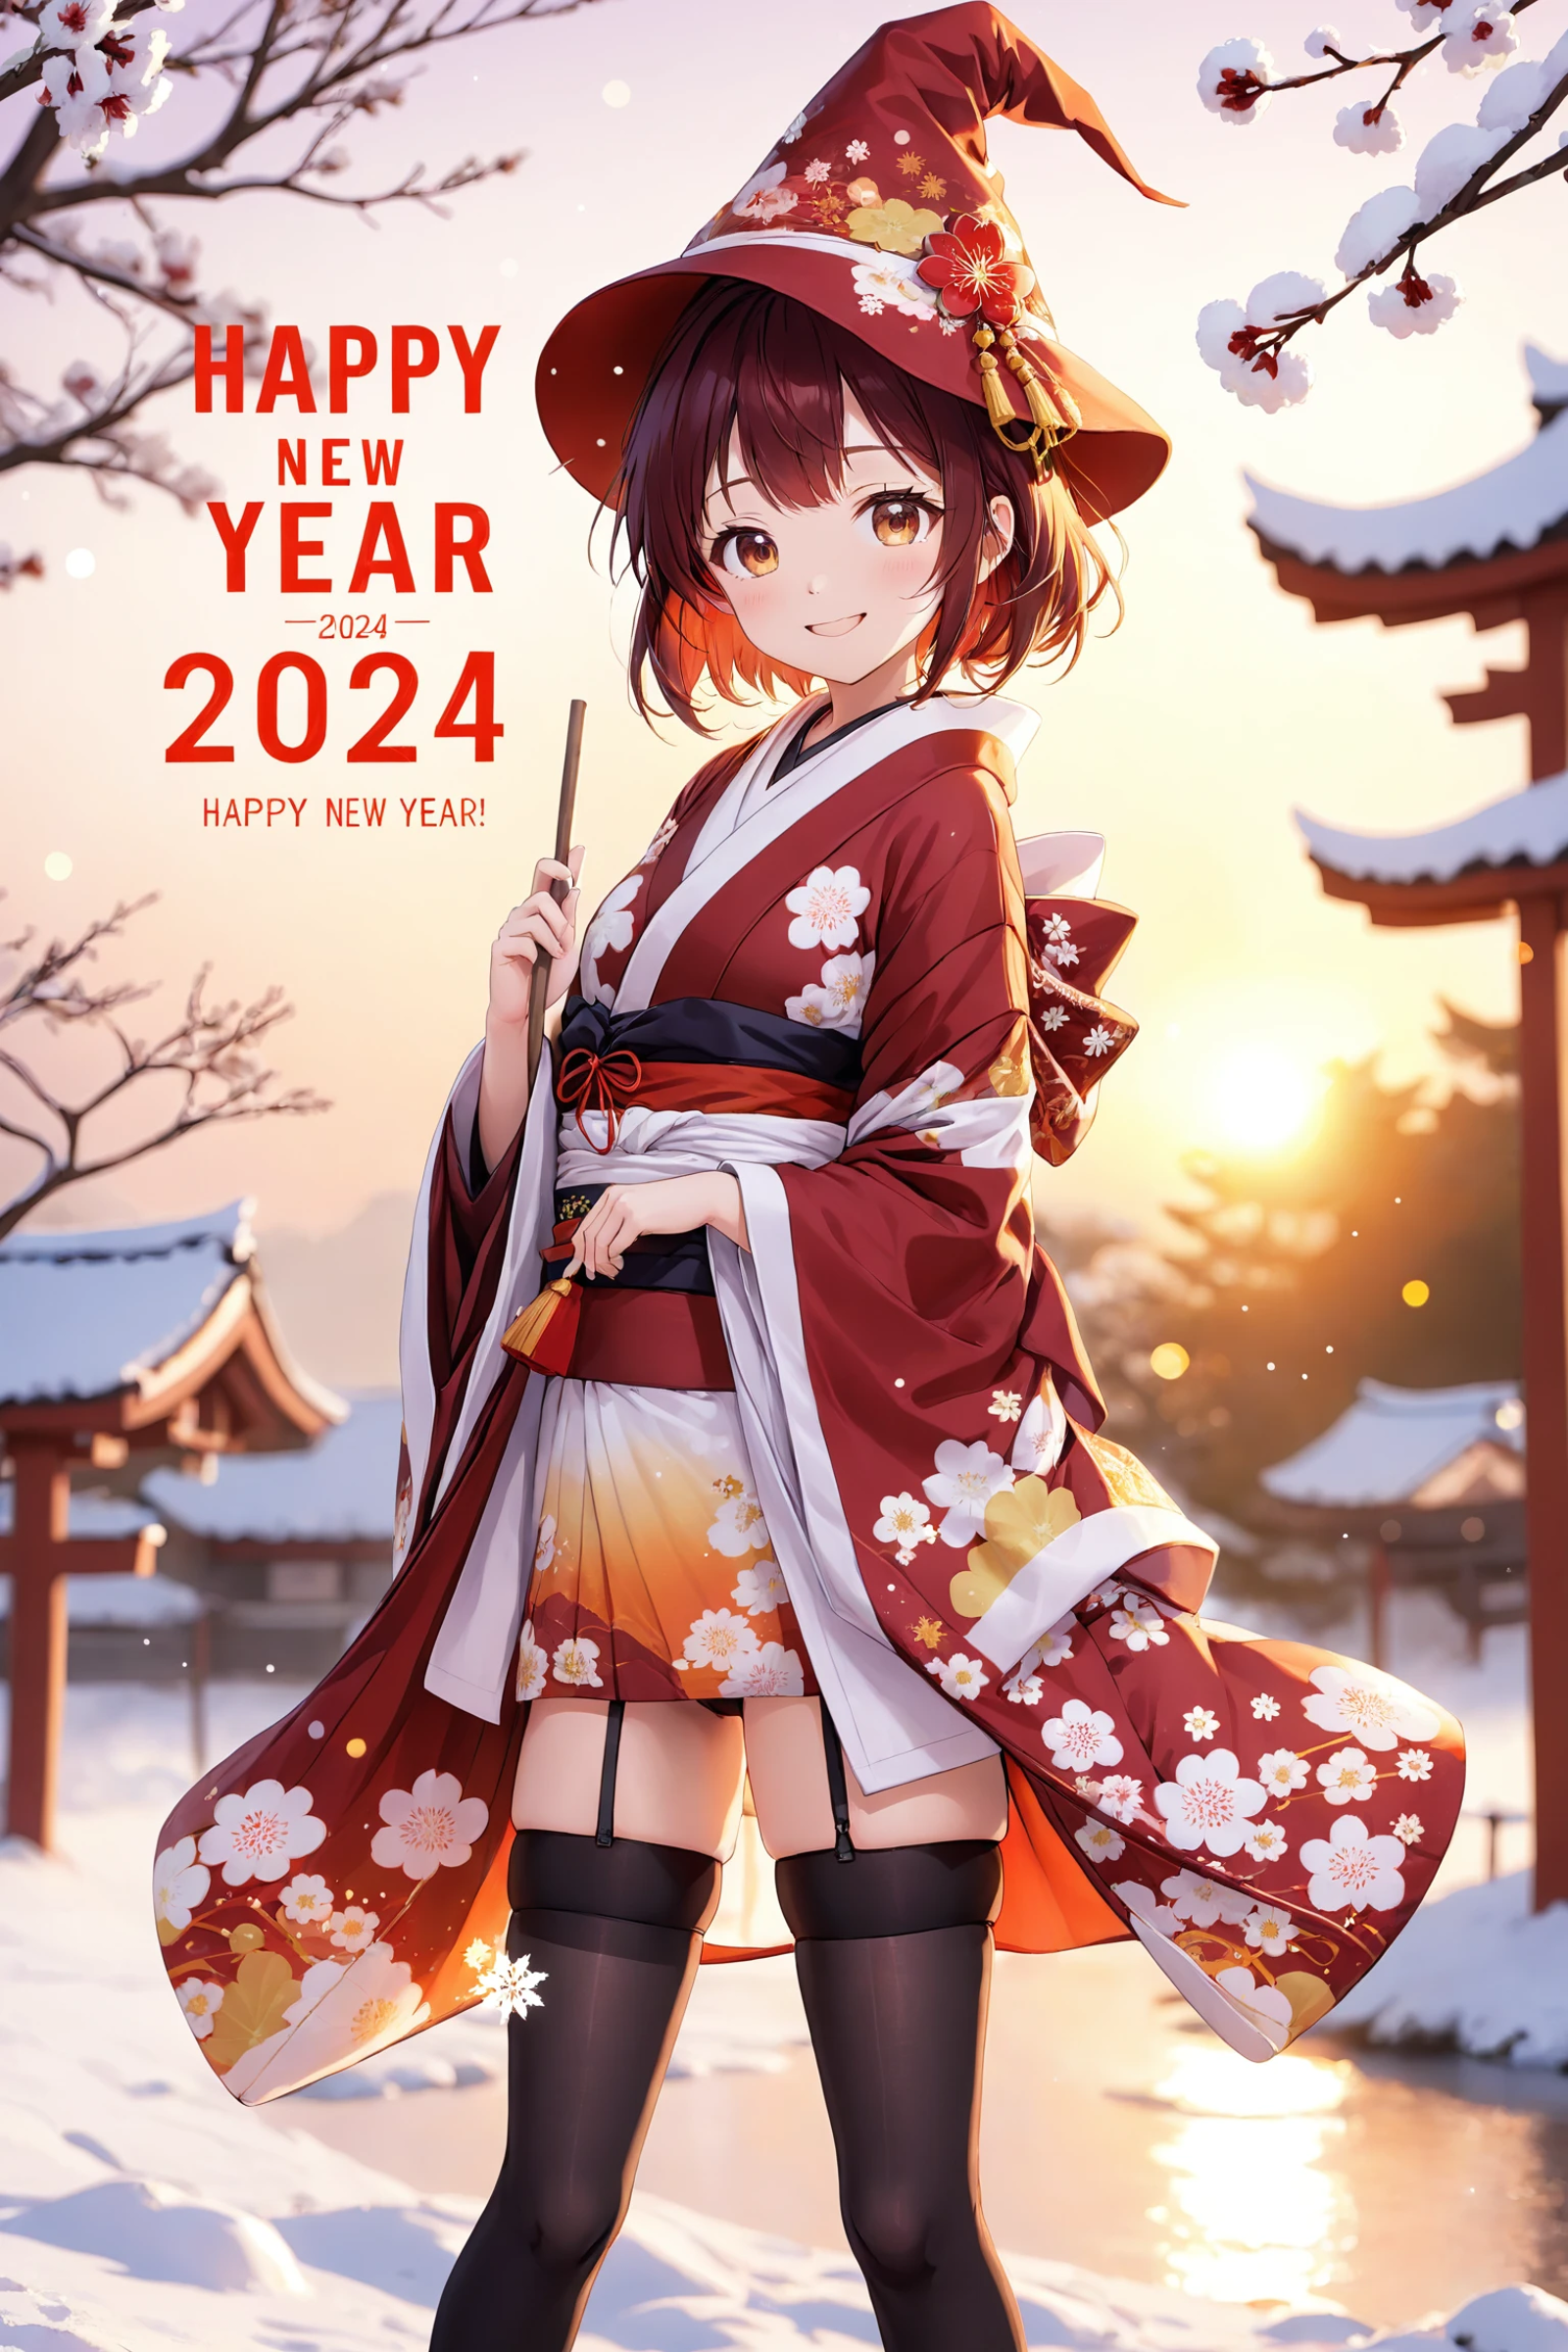 Happy New Year 2021! Anime-style girl in red and white kimono with flowers.